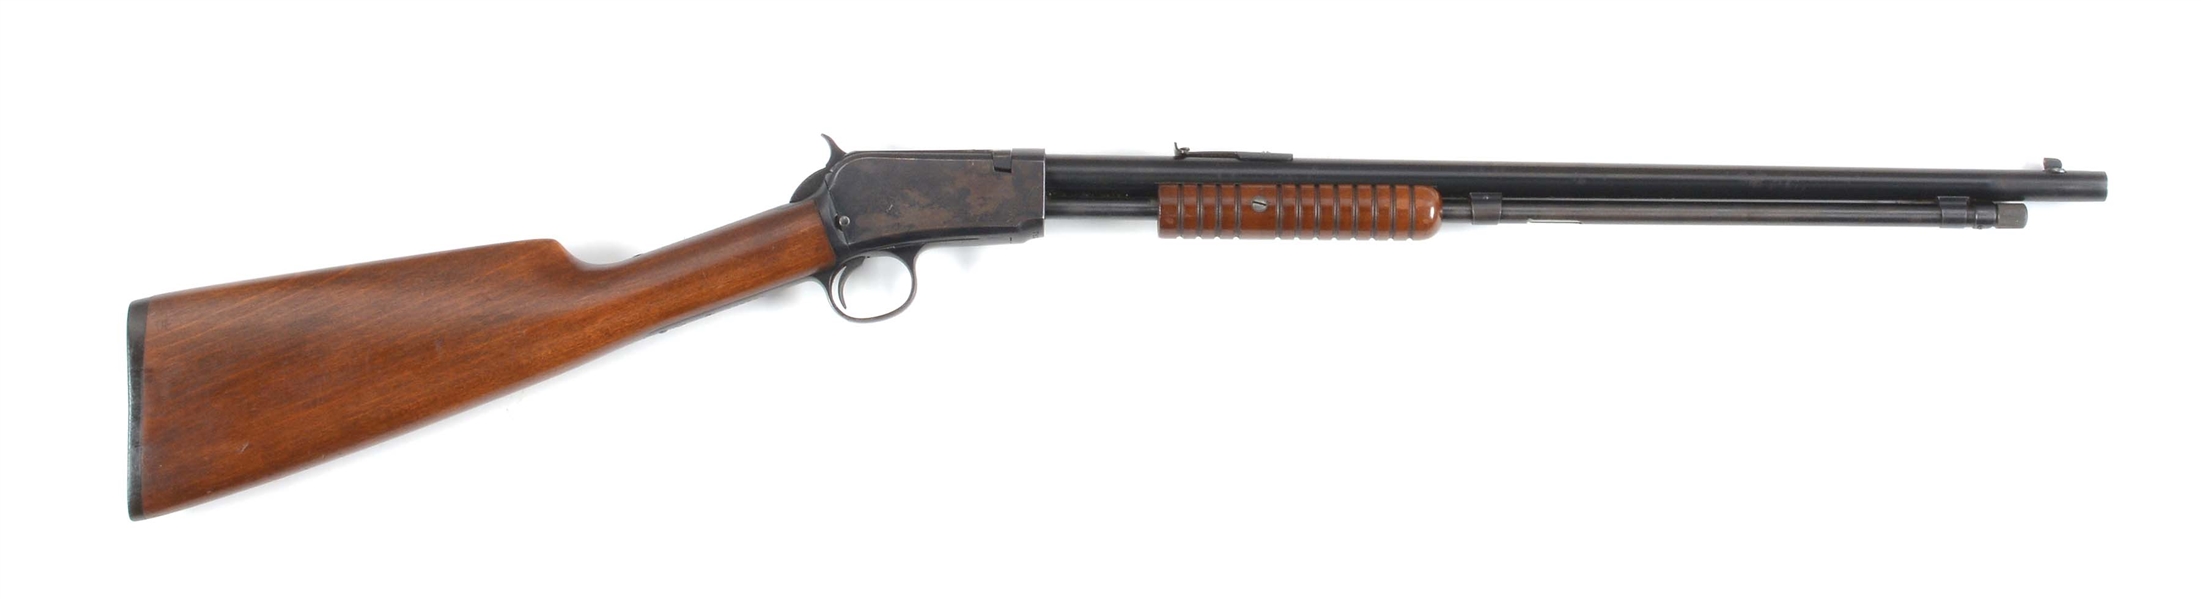 (C) WINCHESTER 06 SLIDE ACTION RIFLE.